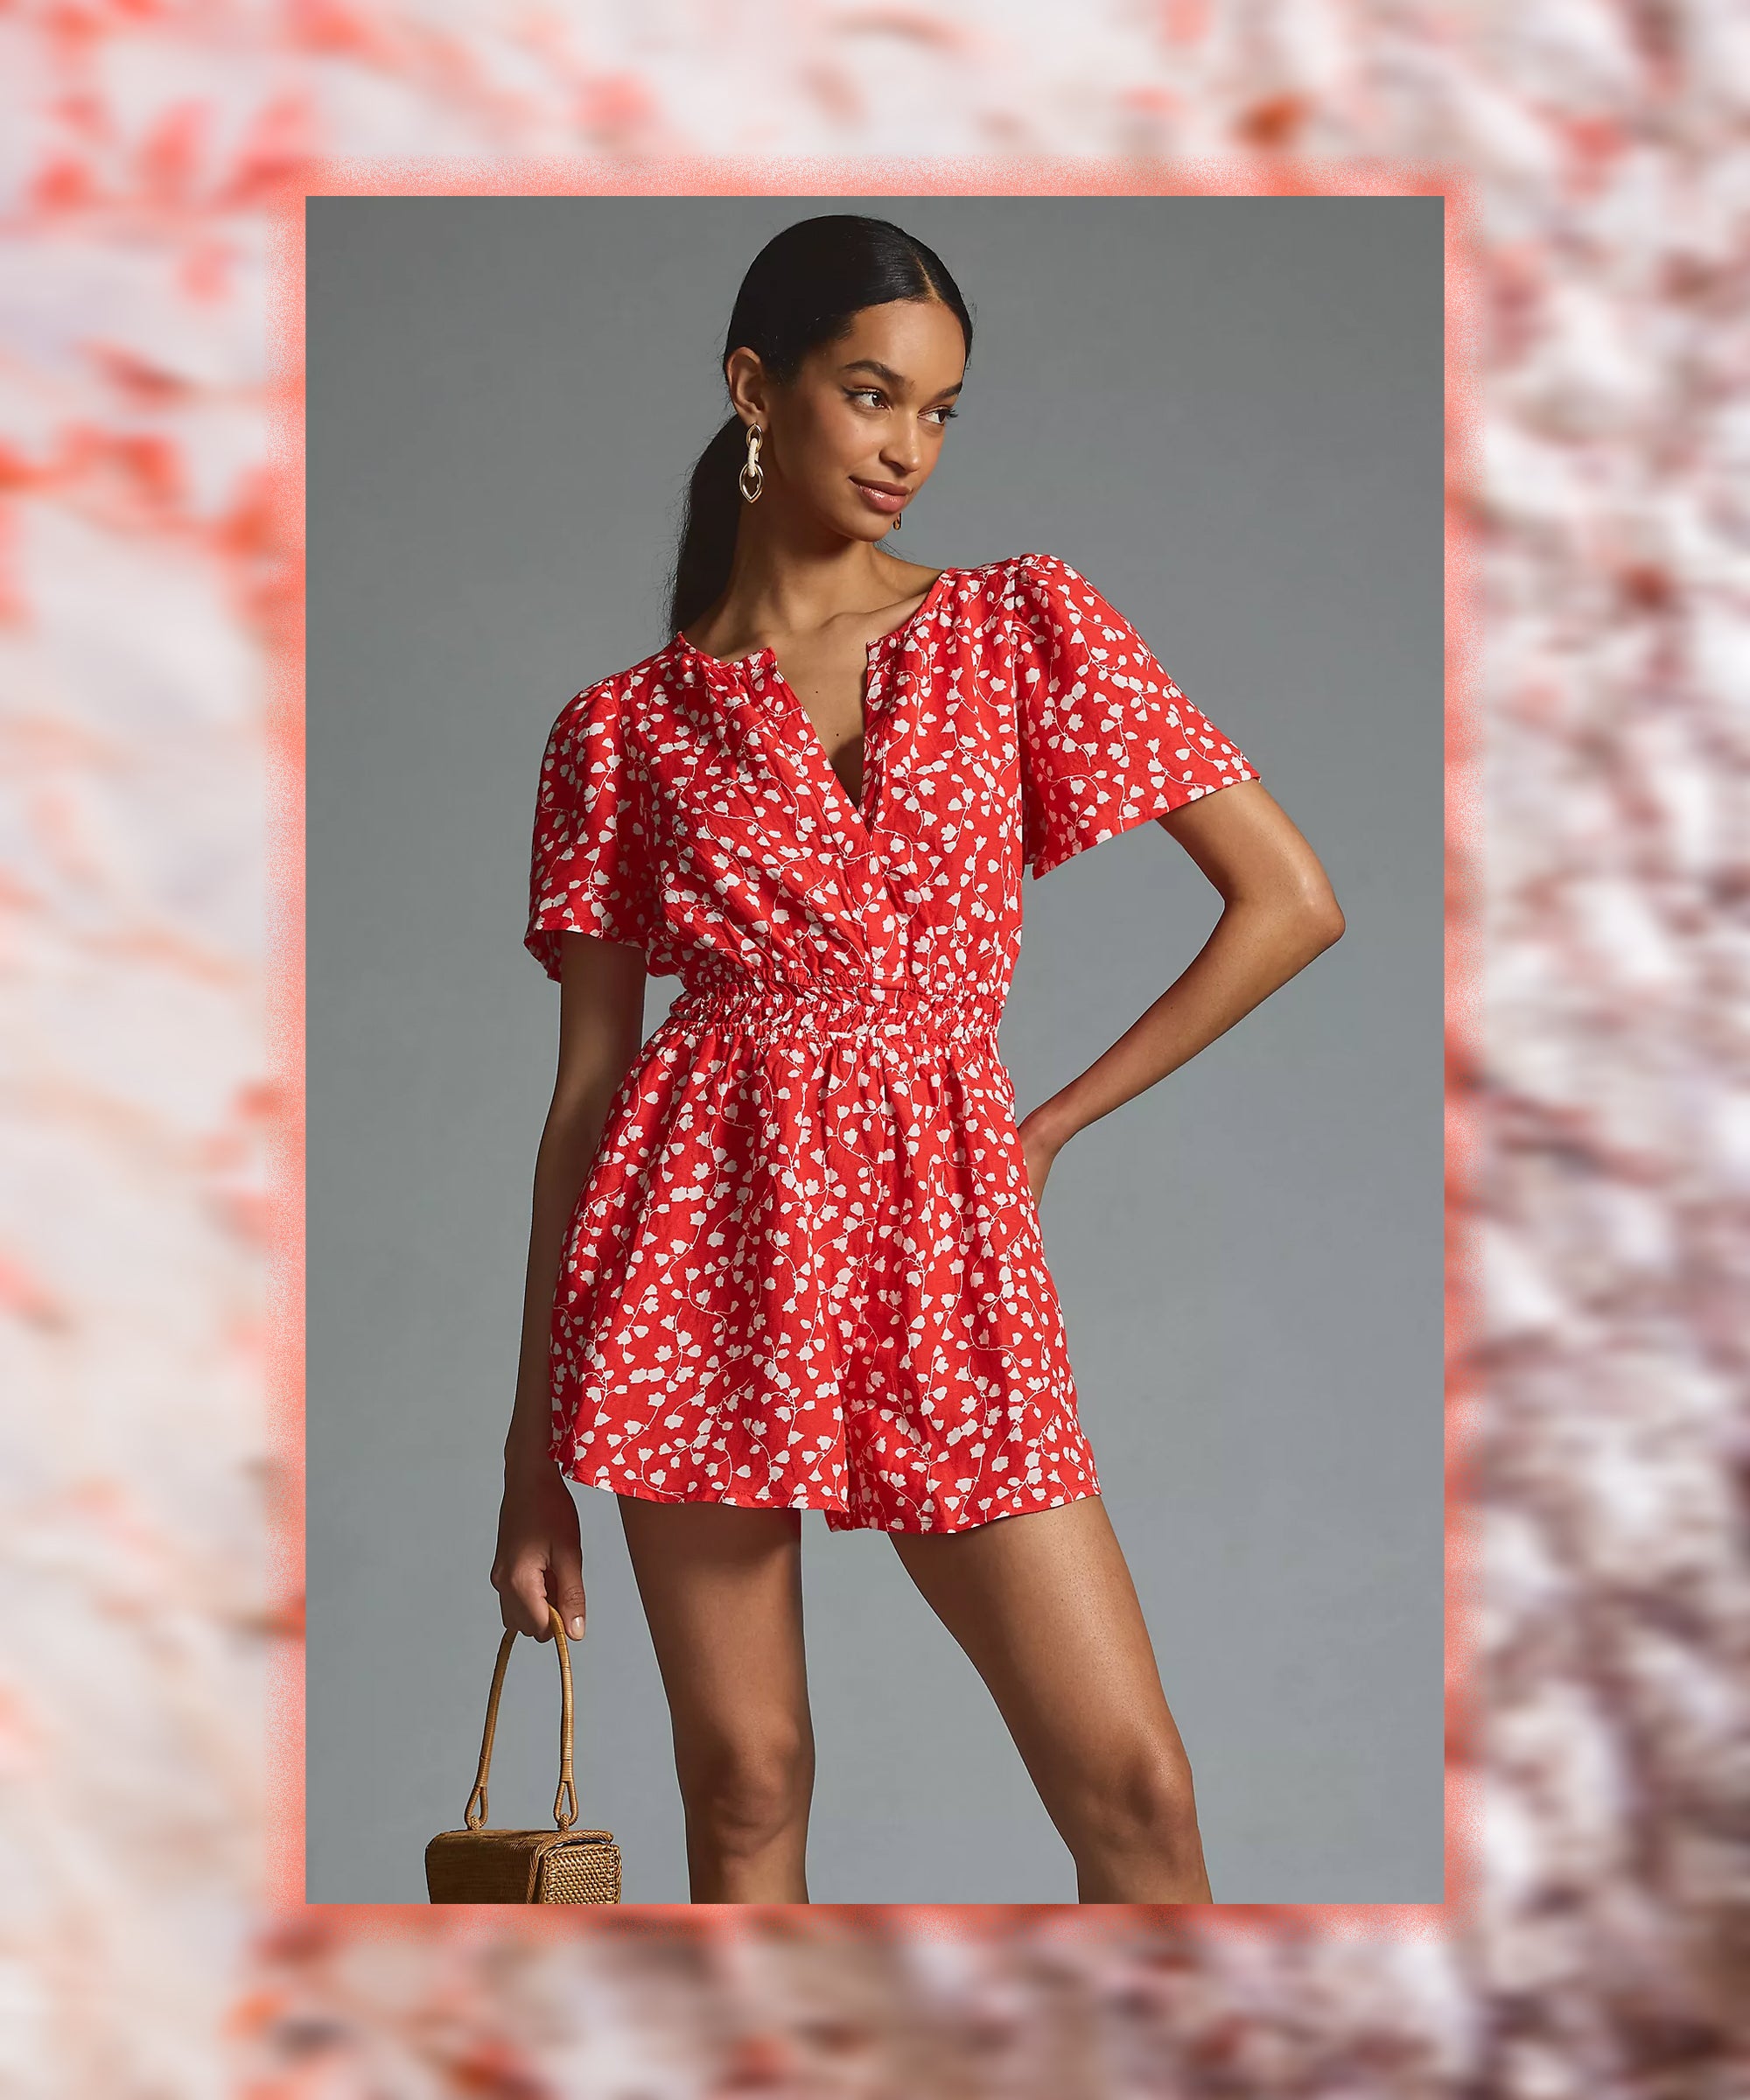 🌞 Summer's Must-Have! Dive into the season with our chic Shorts Romper -  your new go-to for effortless style. 🌼✨ 👉 We Want